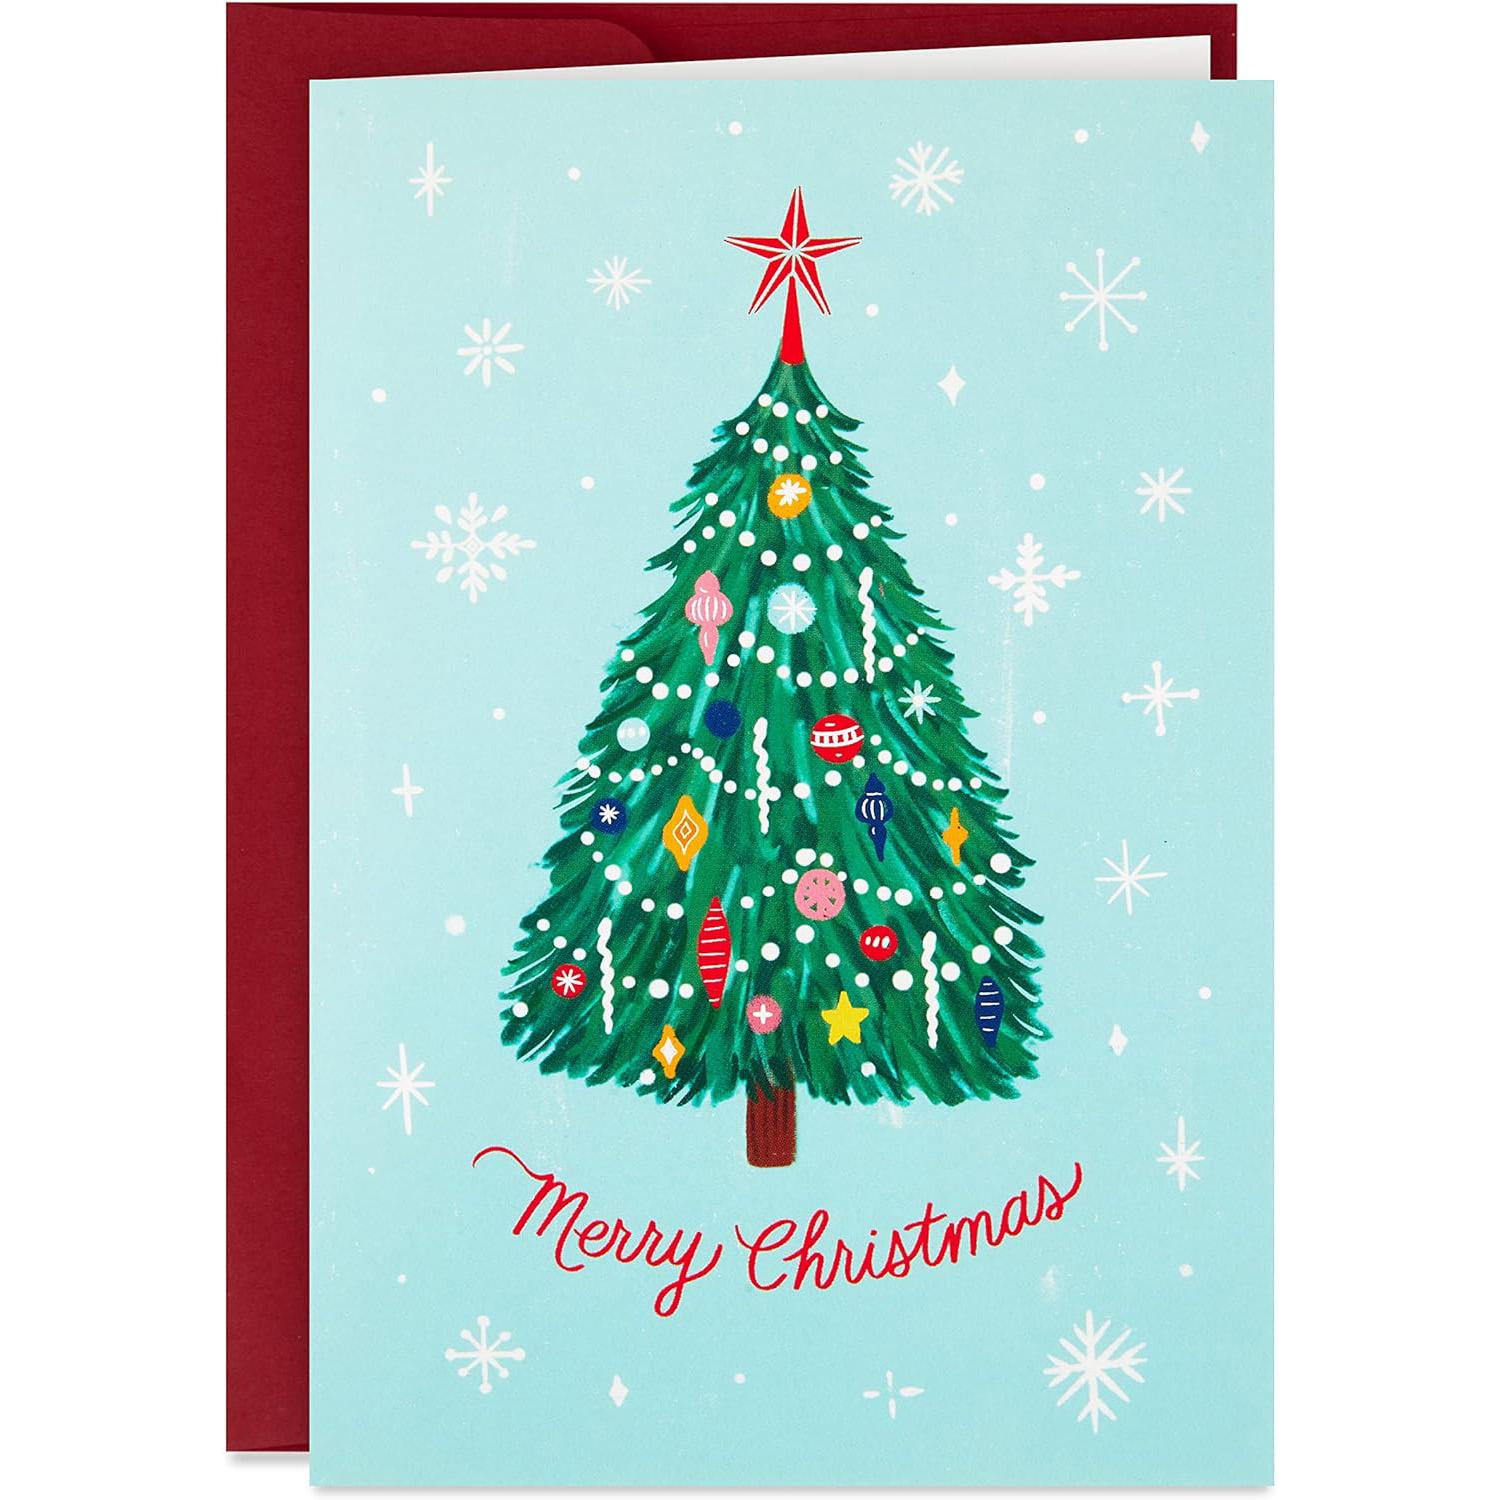 Hallmark Pack of 10 Personalized Video Christmas Cards for $2.67